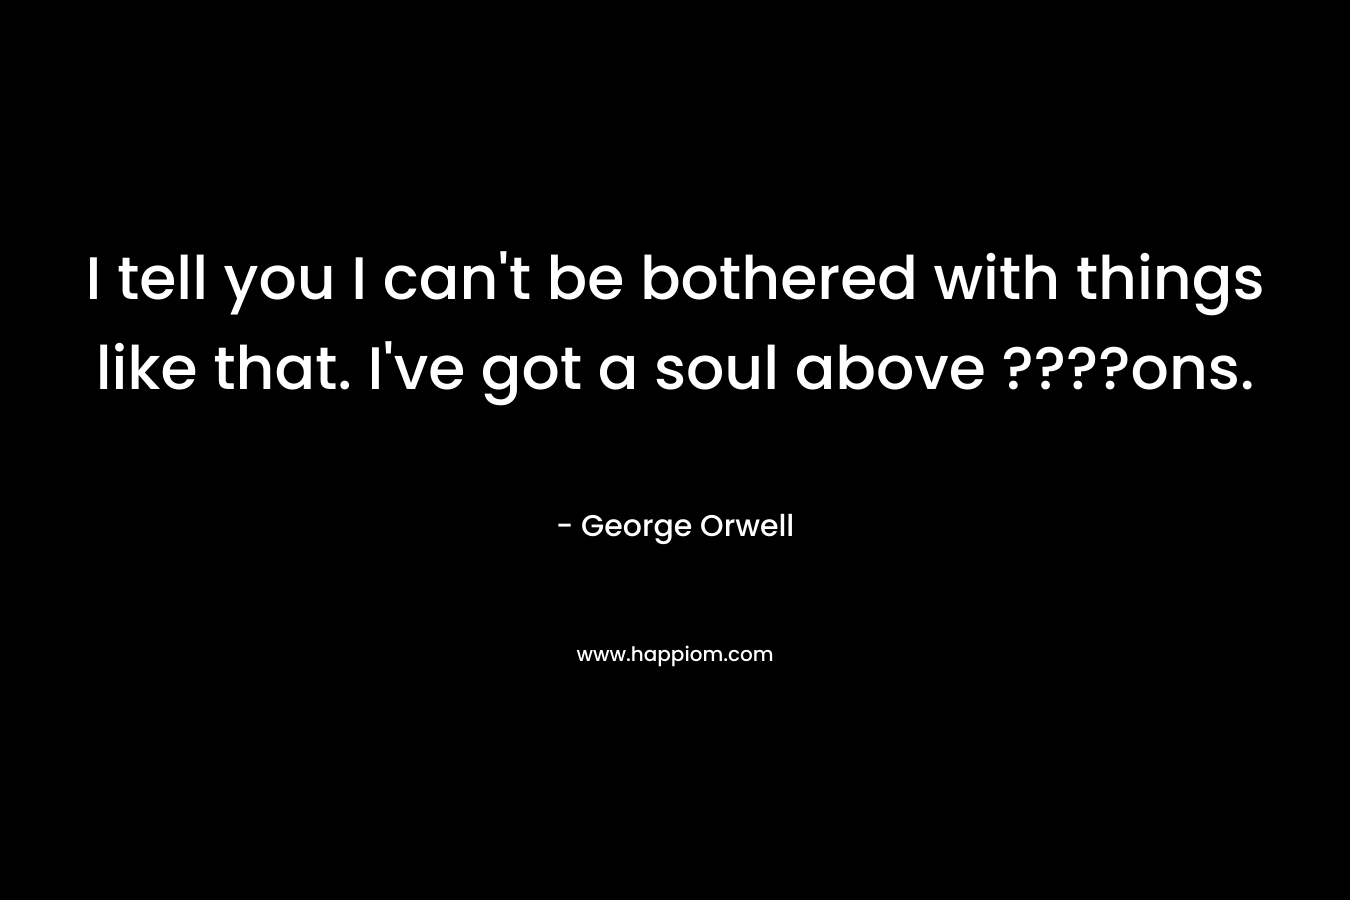 I tell you I can’t be bothered with things like that. I’ve got a soul above ????ons. – George Orwell